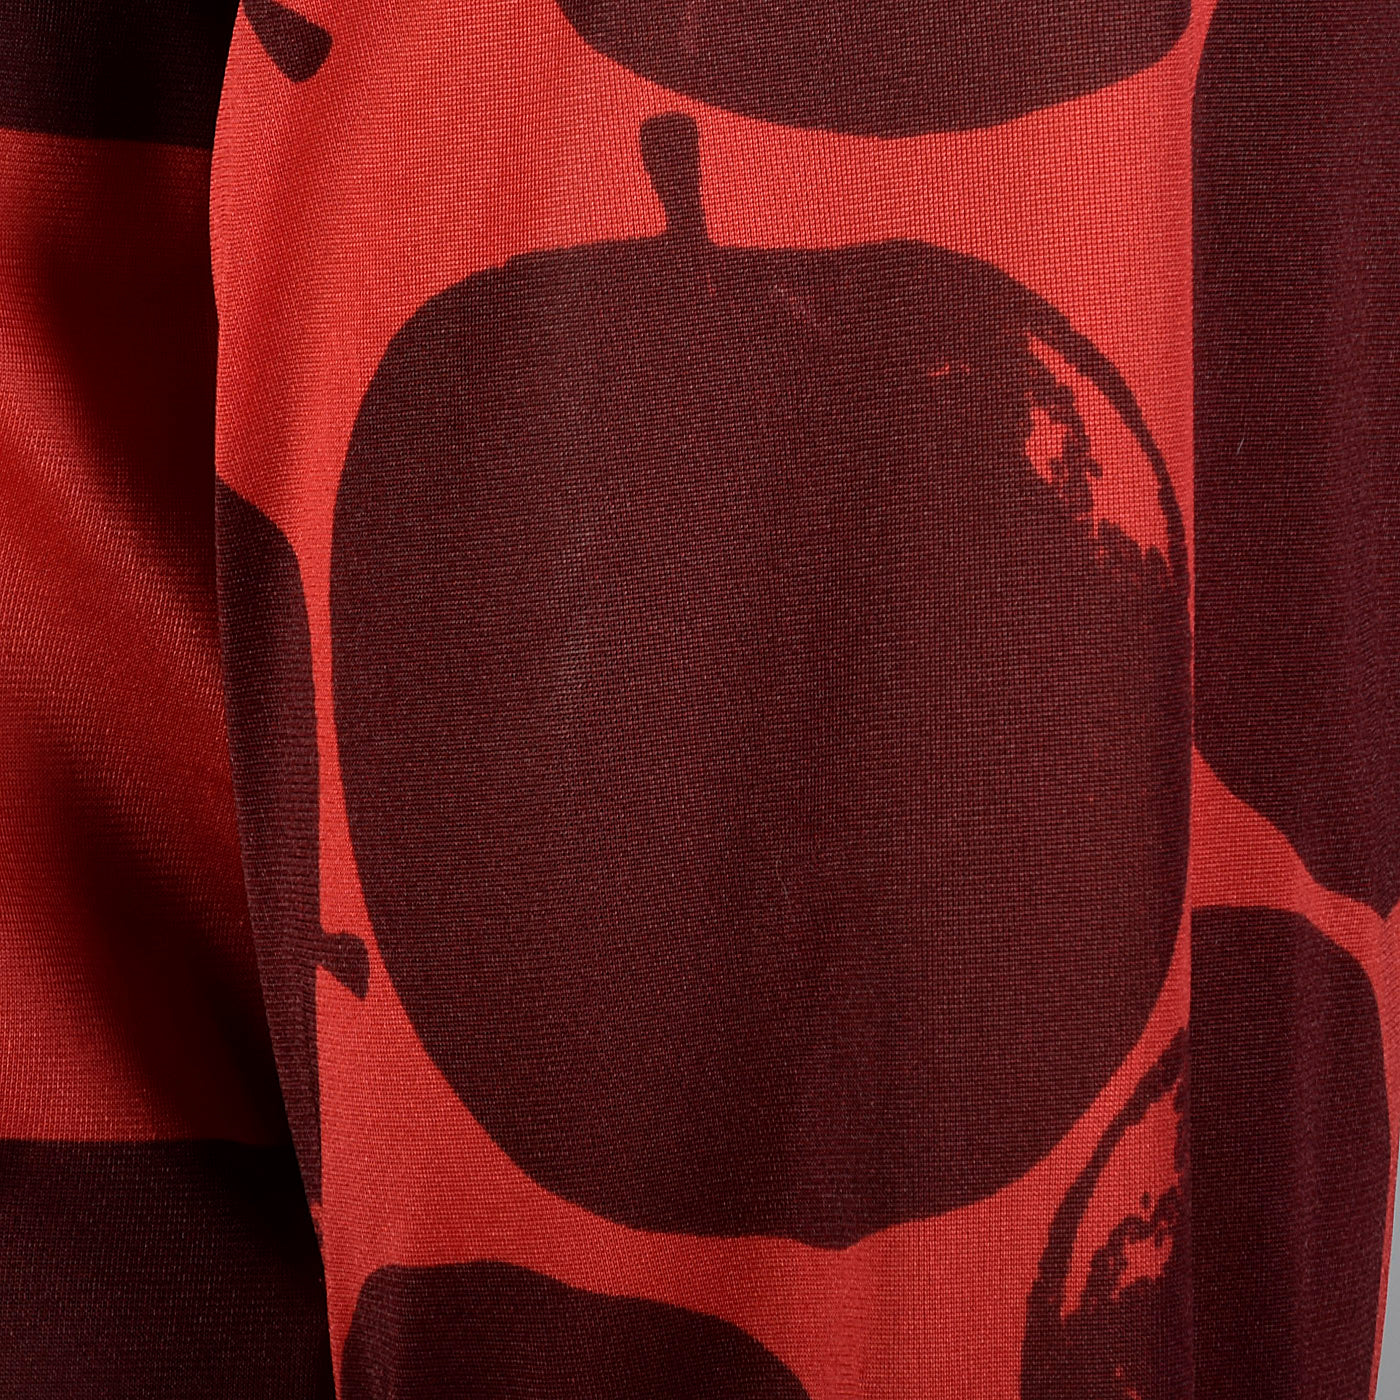 2000s Comme des Garcons Red Silky Apple and Check Print Shirt